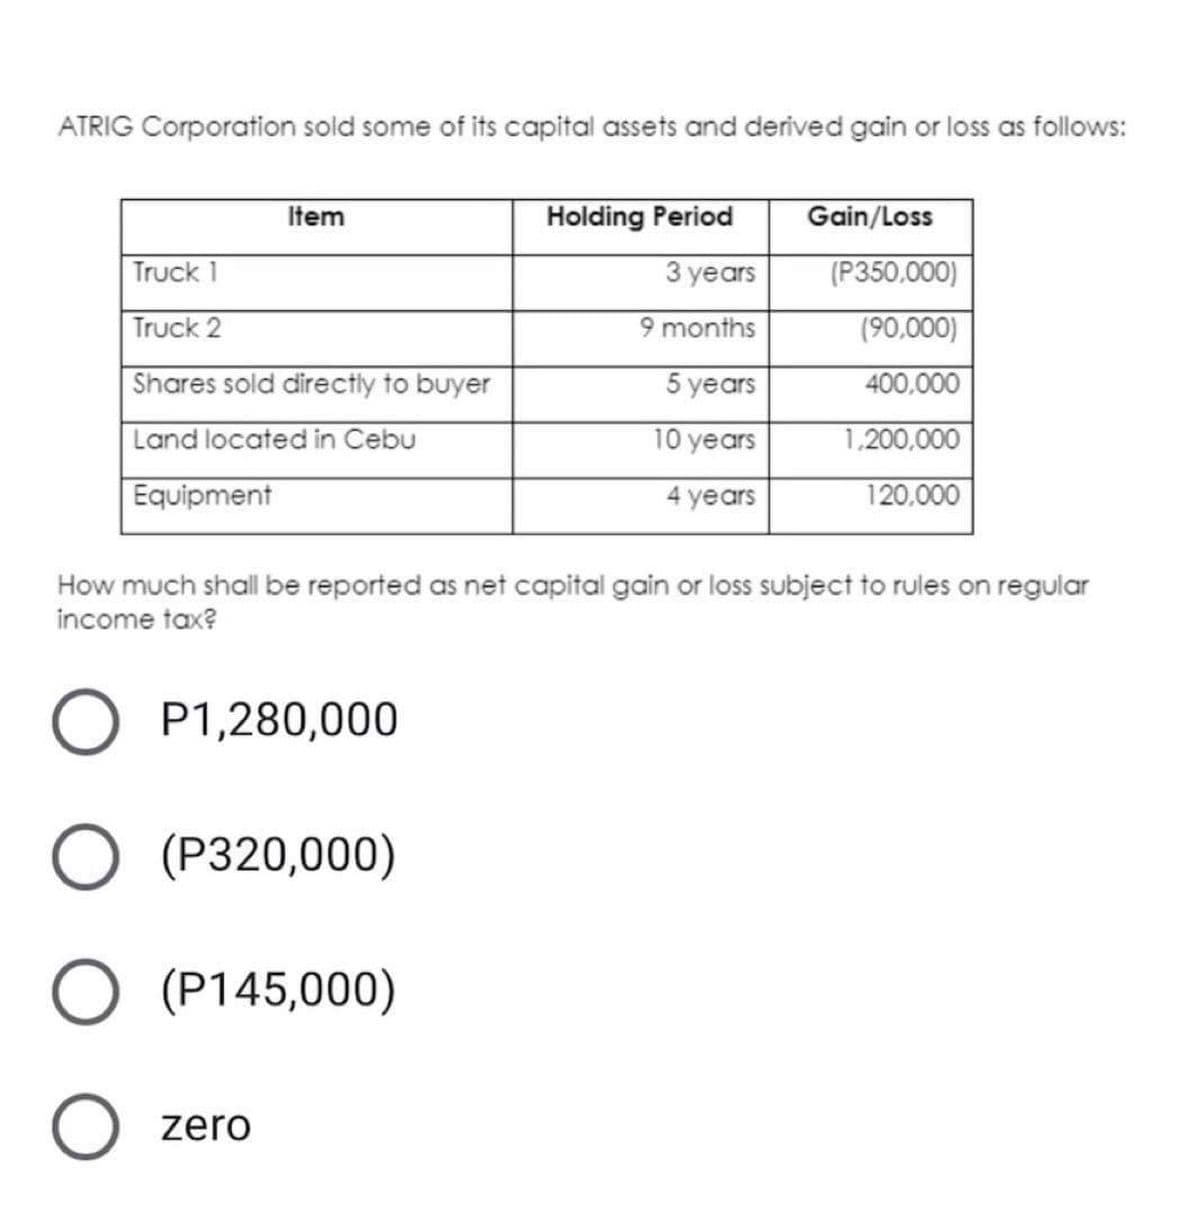 ATRIG Corporation sold some of its capital assets and derived gain or loss as follows:
Item
Holding Period
Gain/Loss
Truck 1
3 years
(P350,000)
Truck 2
9 months
(90,000)
Shares sold directly to buyer
5 years
400,000
Land located in Cebu
10 years
1,200,000
Equipment
4 years
120,000
How much shall be reported as net capital gain or loss subject to rules on regular
income tax?
P1,280,000
O (P320,000)
O (P145,000)
zero
